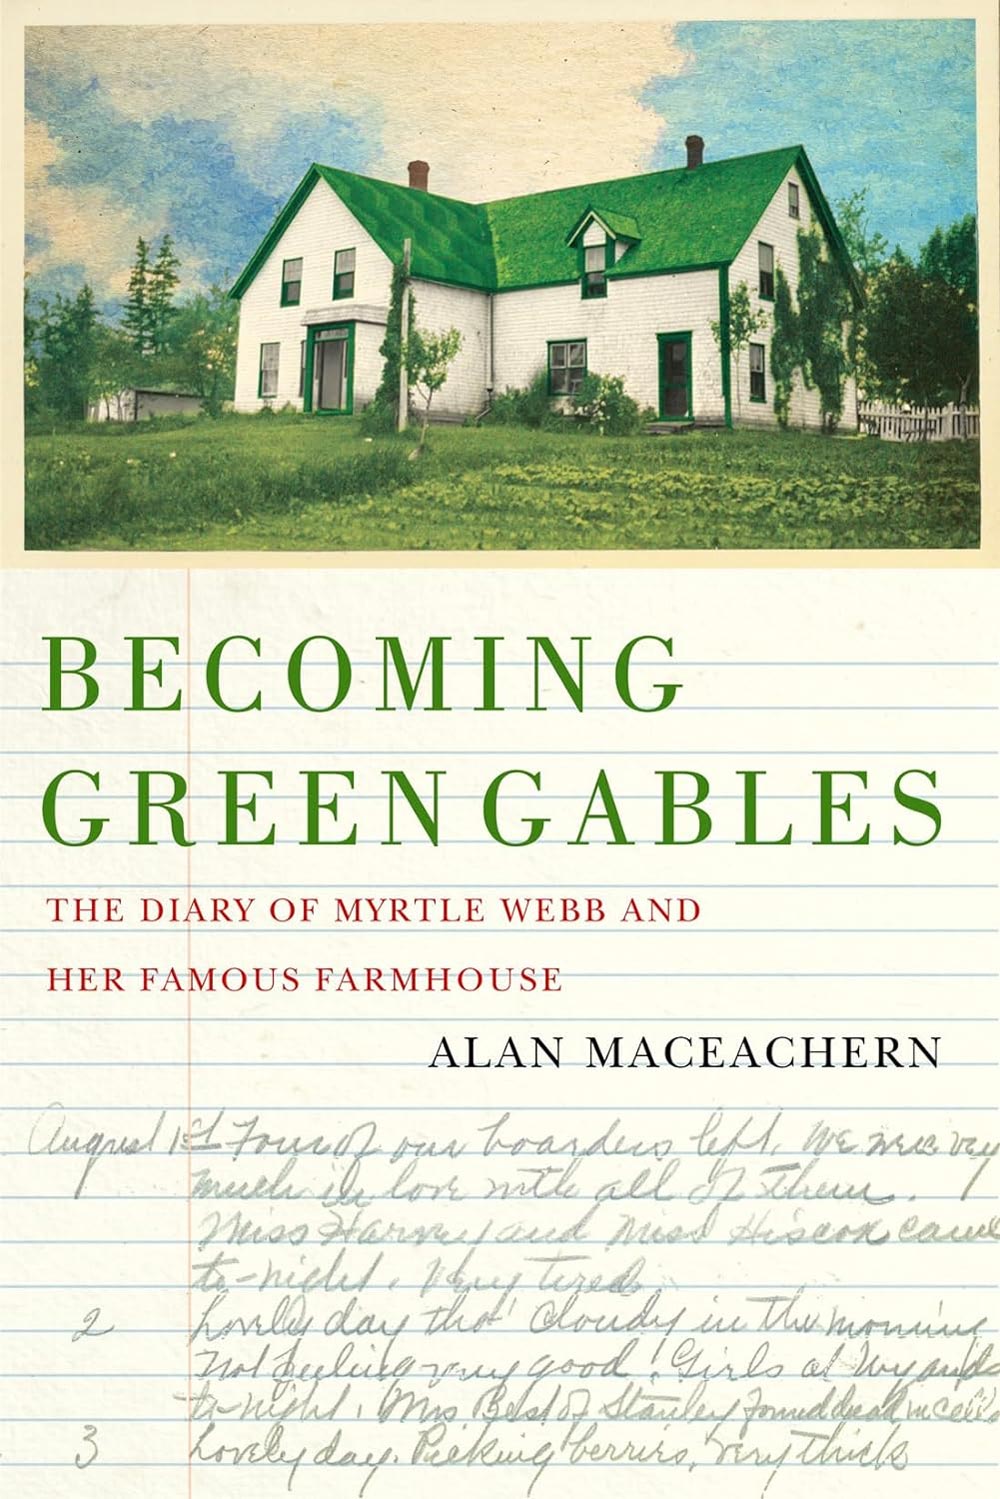 Becoming Green Gables: The Diary of Myrtle Webb and Her Famous Farmhouse by Alan MacEachern